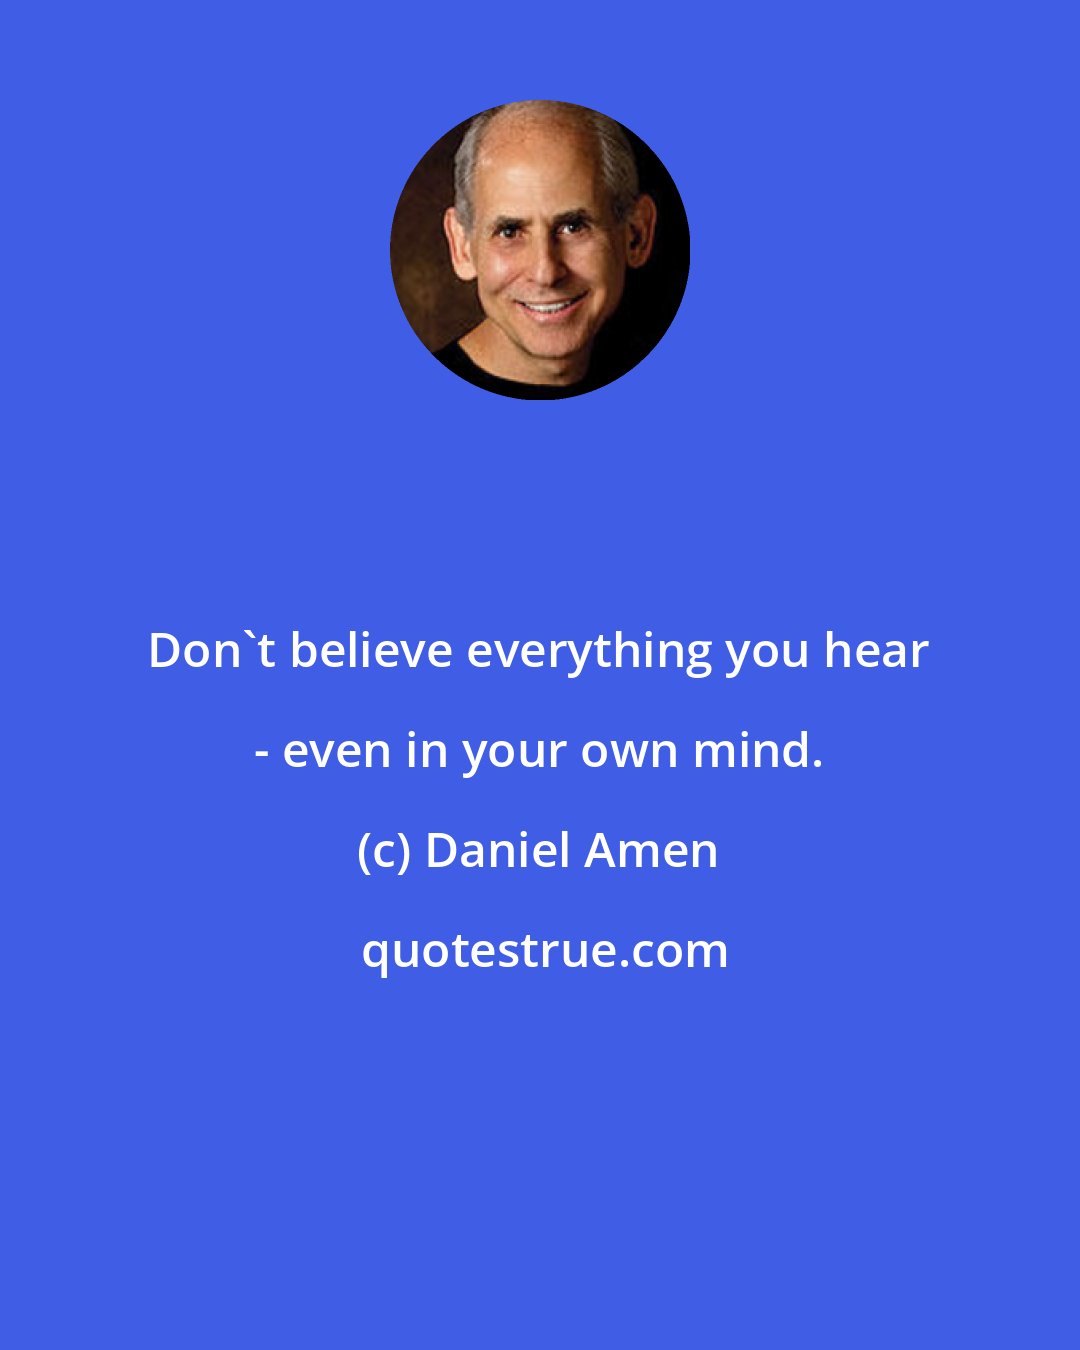 Daniel Amen: Don't believe everything you hear - even in your own mind.